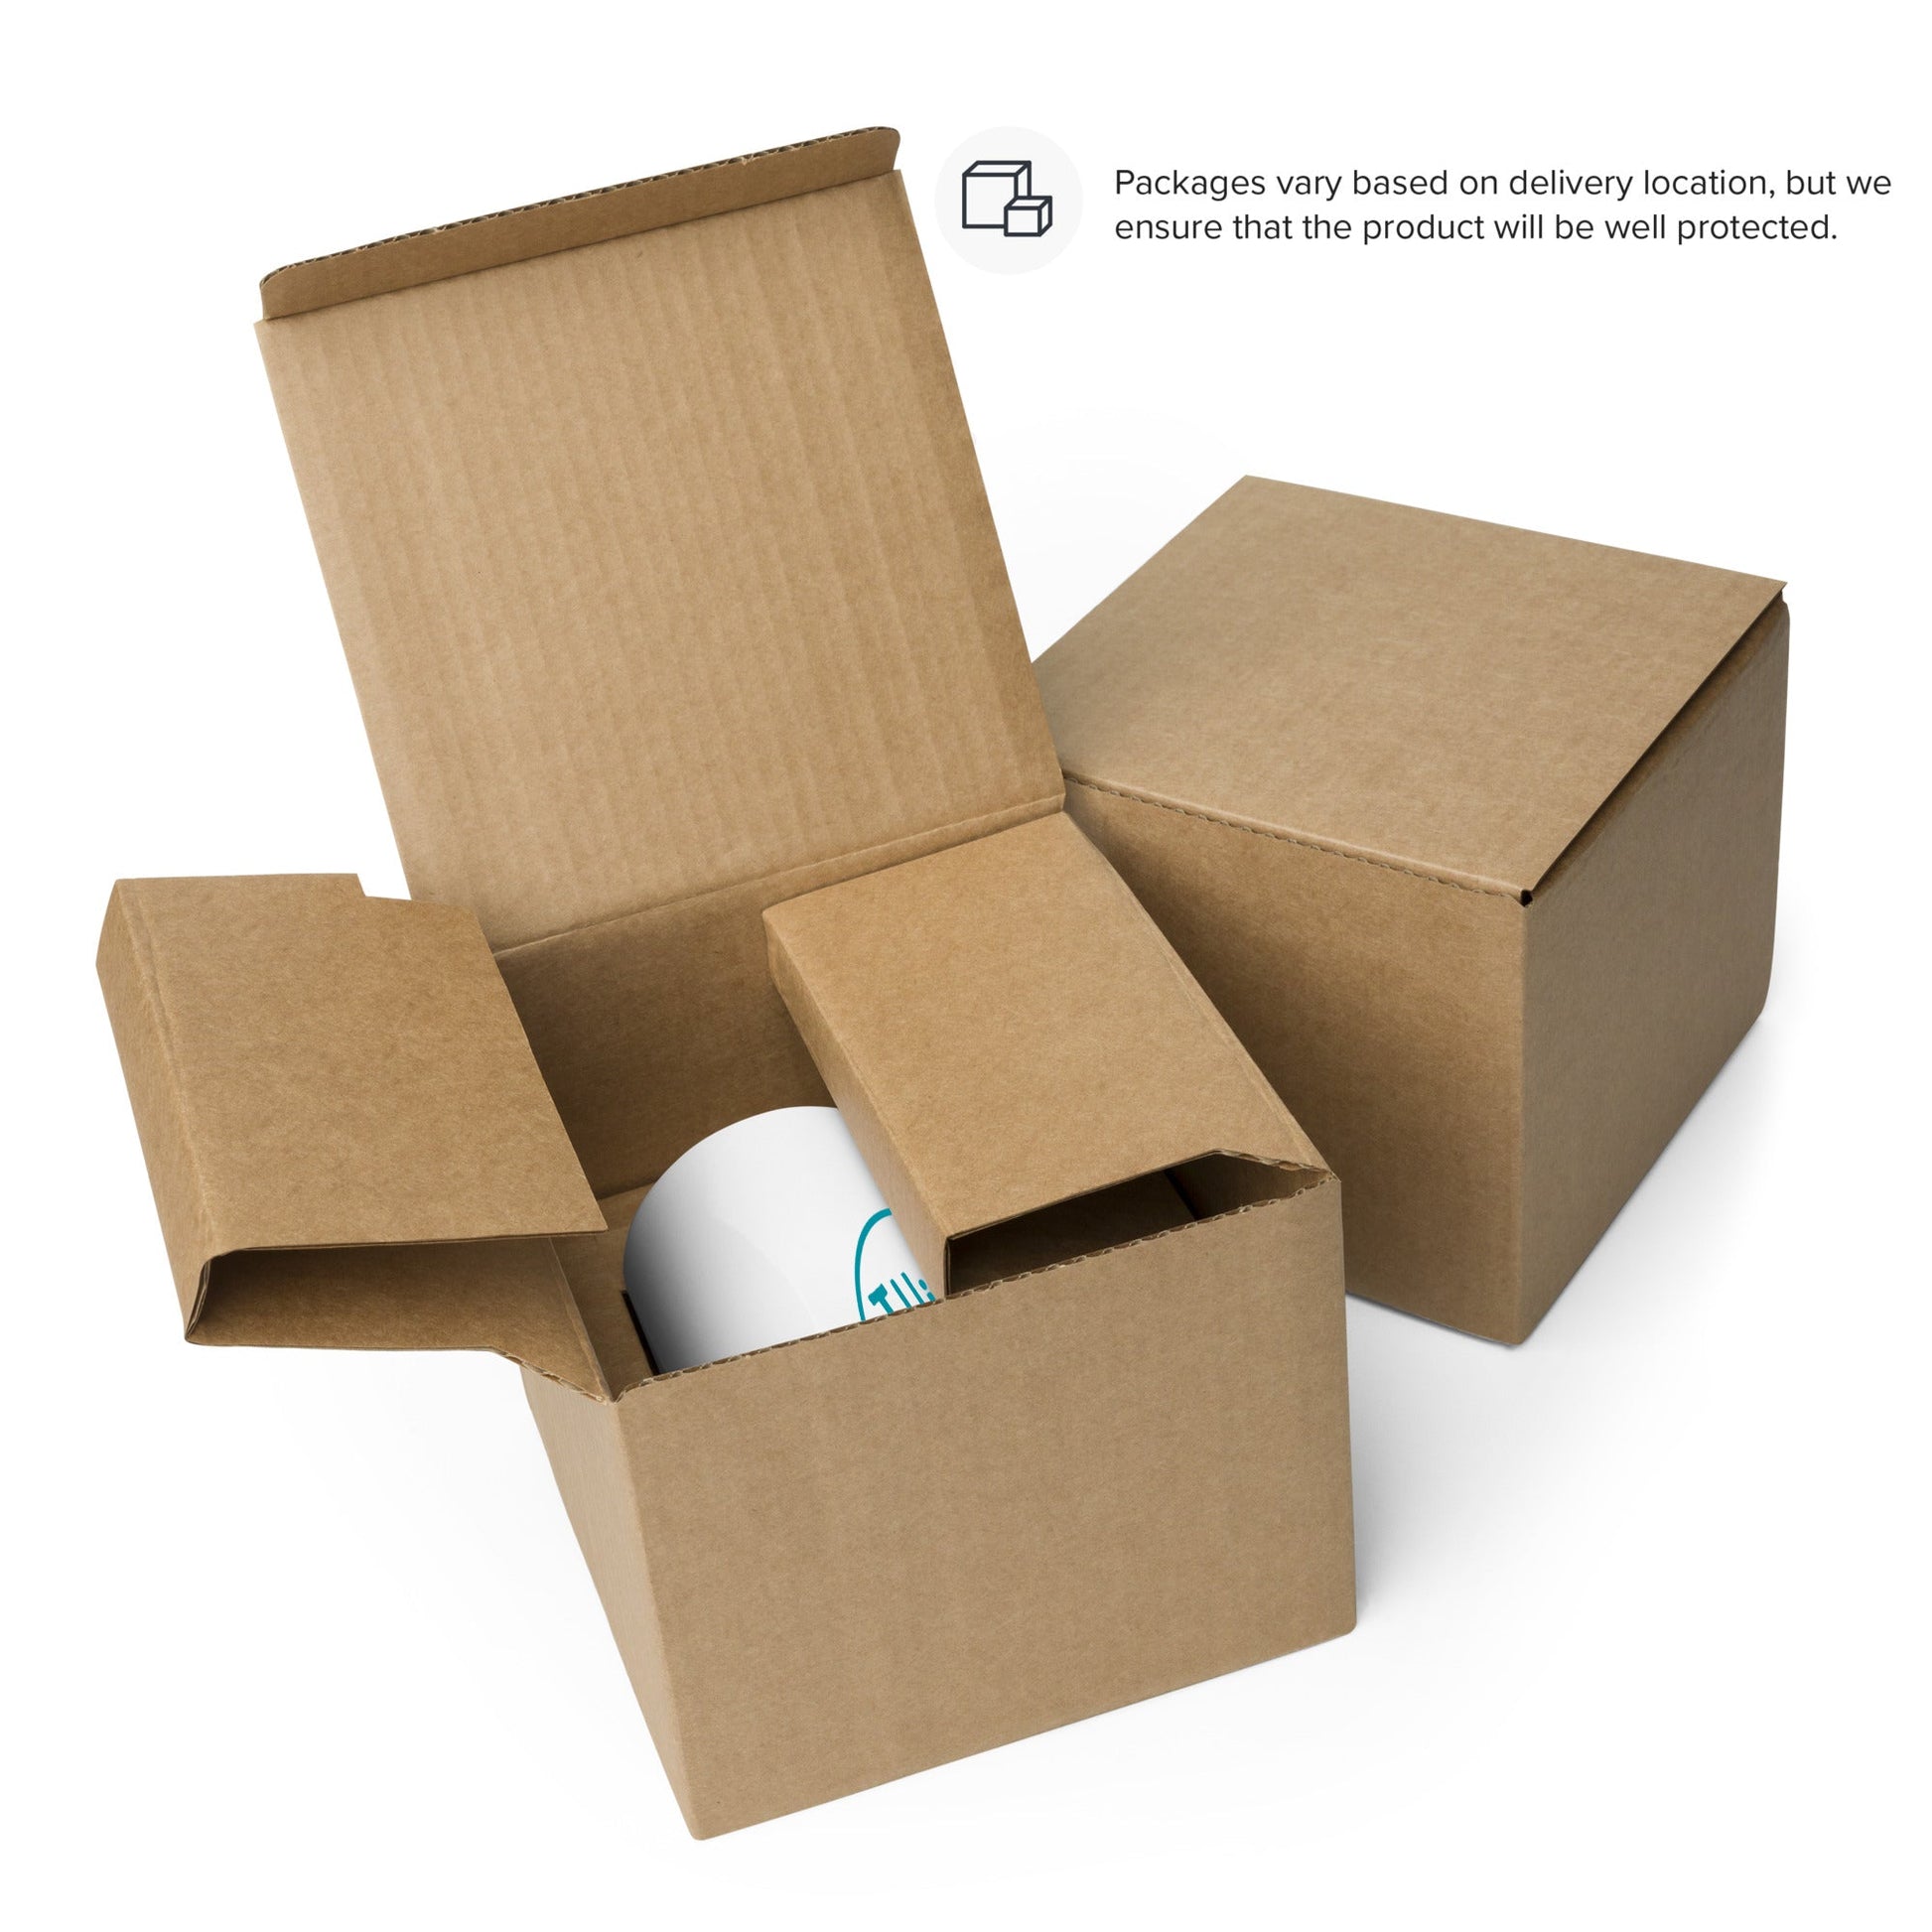 Cardboard boxes open to reveal careful packaging of a White Glossy Mug Teal THiNK LiKE A DOG® Logo inside, designed for dog lovers and branded with THiNK LiKE A DOG®.